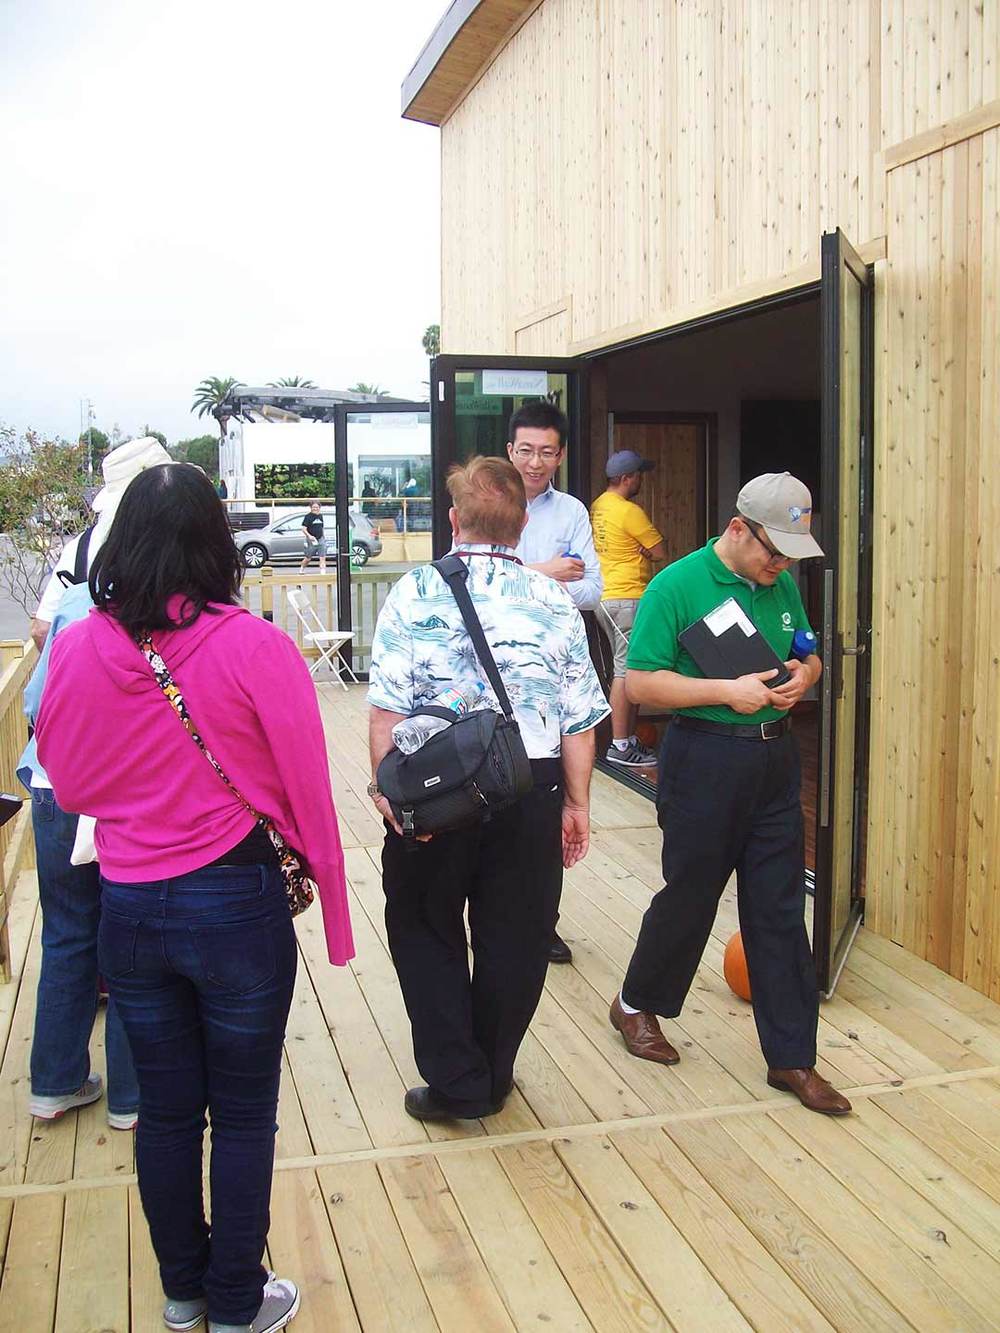  Visitors exchange discussions on our homes systems and exchanging personal stories on our large porch. 